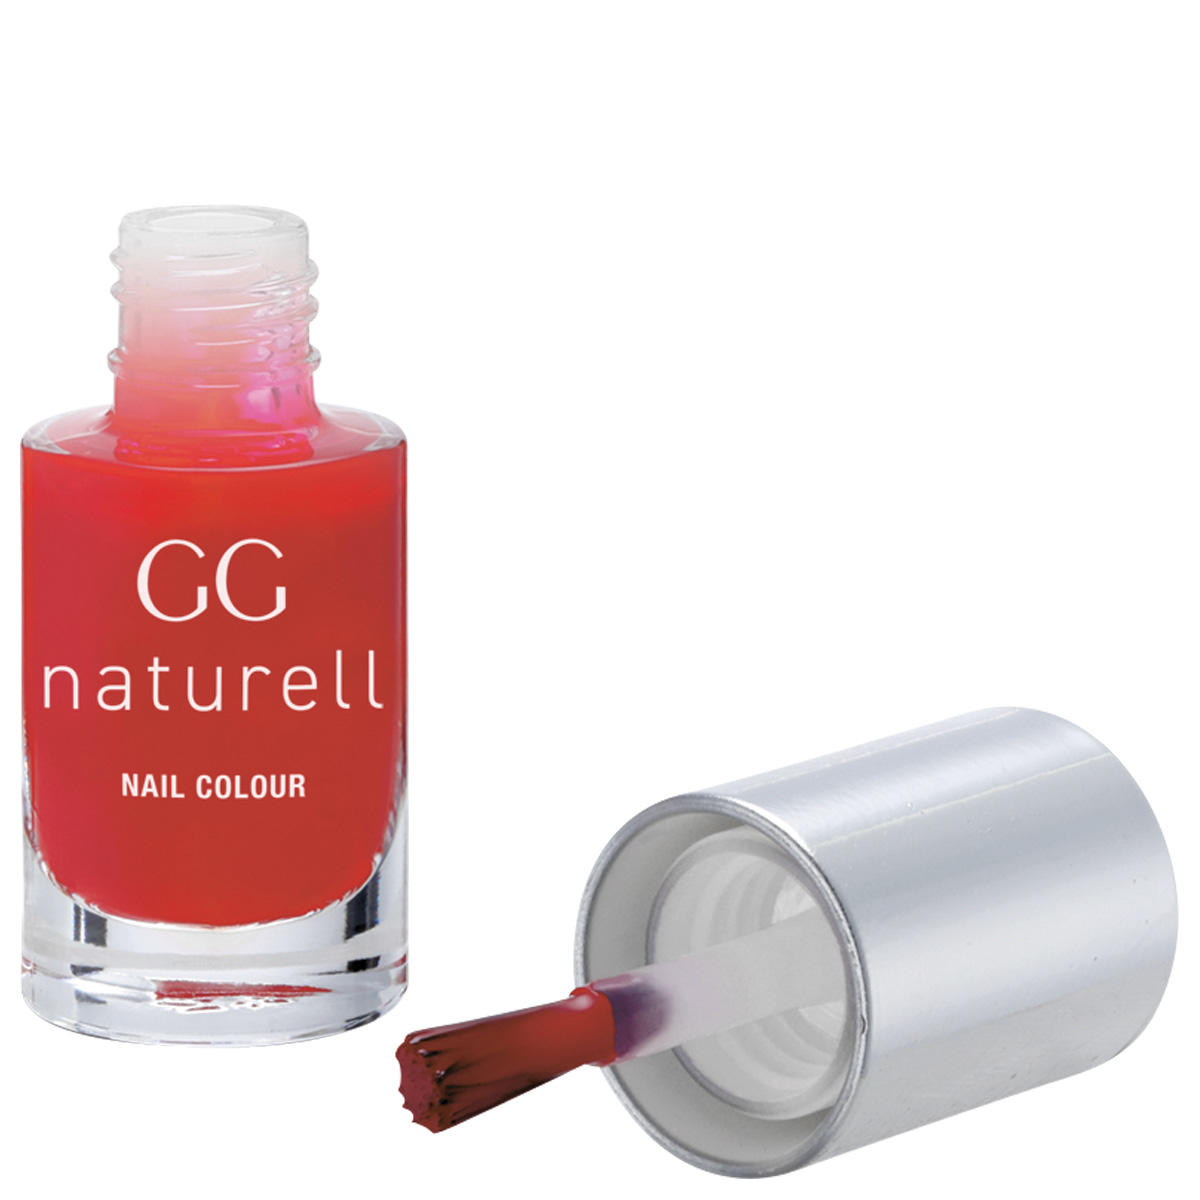 GERTRAUD GRUBER GG naturell Nail Colour 70 Mohnblüte 5 ml - 1